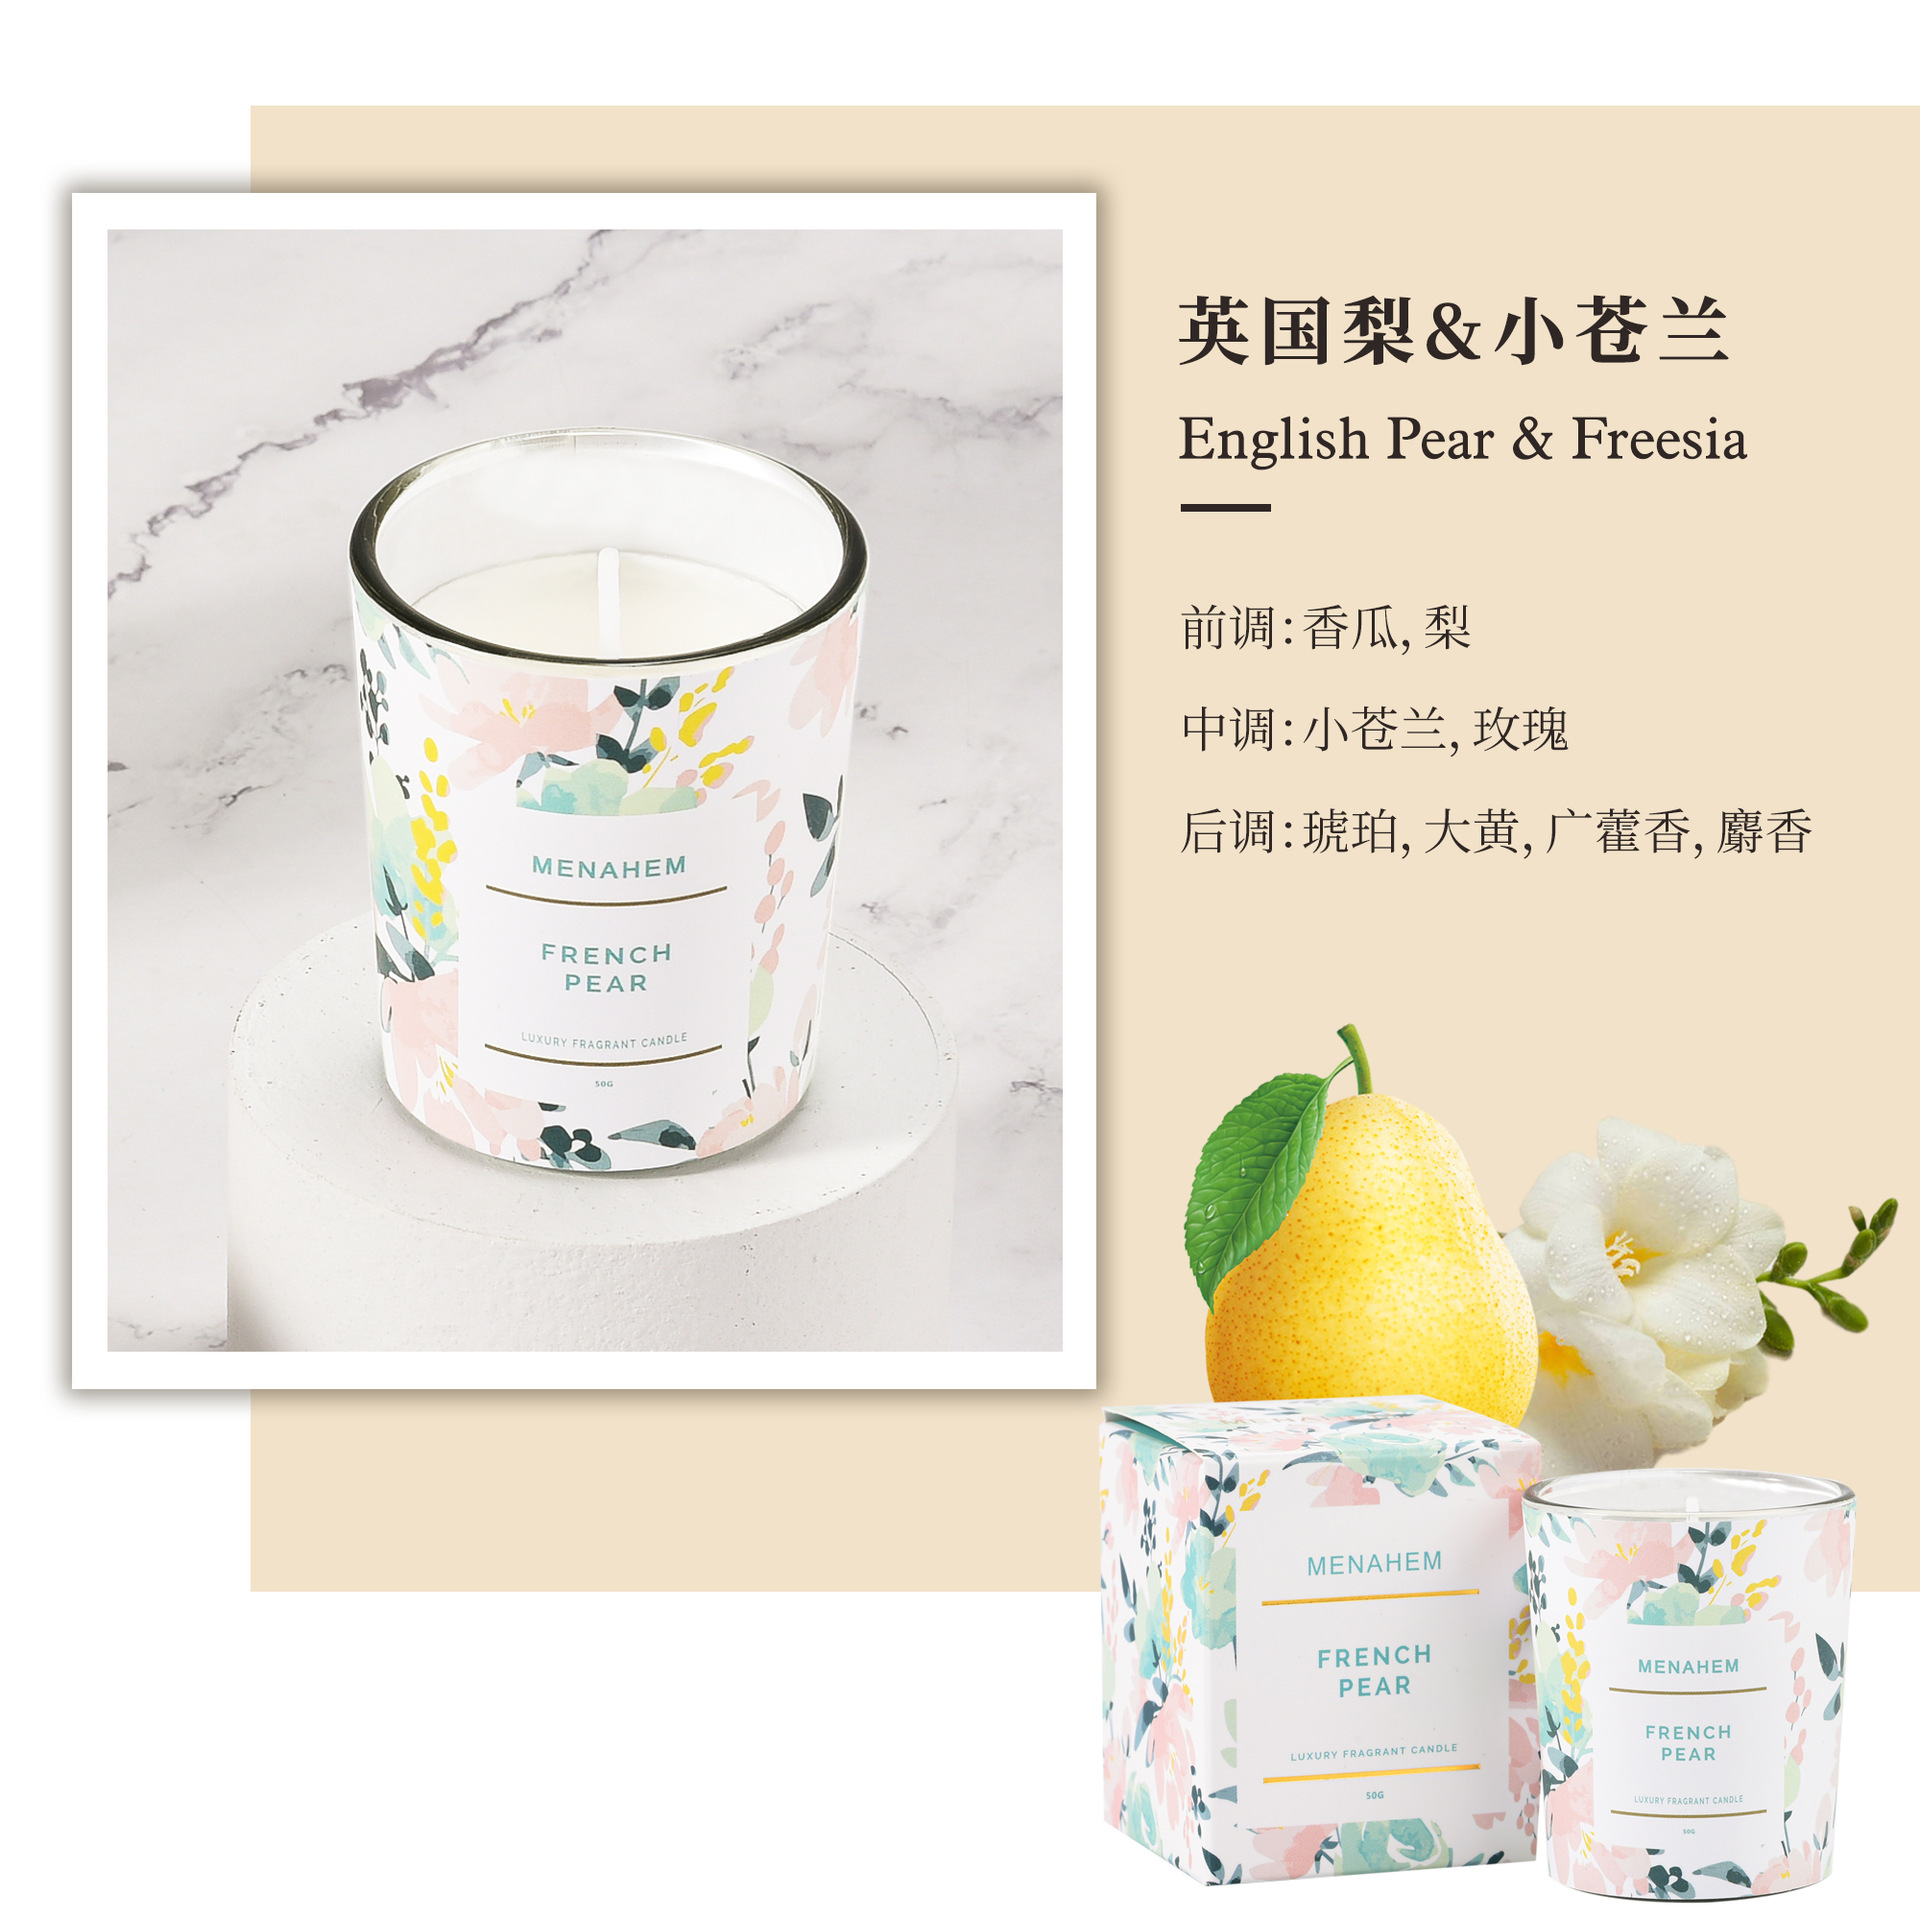 Creative Flower Aromatherapy Candle Wholesale Smoke-Free Fragrance Soy Wax Household Essential Oil Candle Cute Holiday Gift